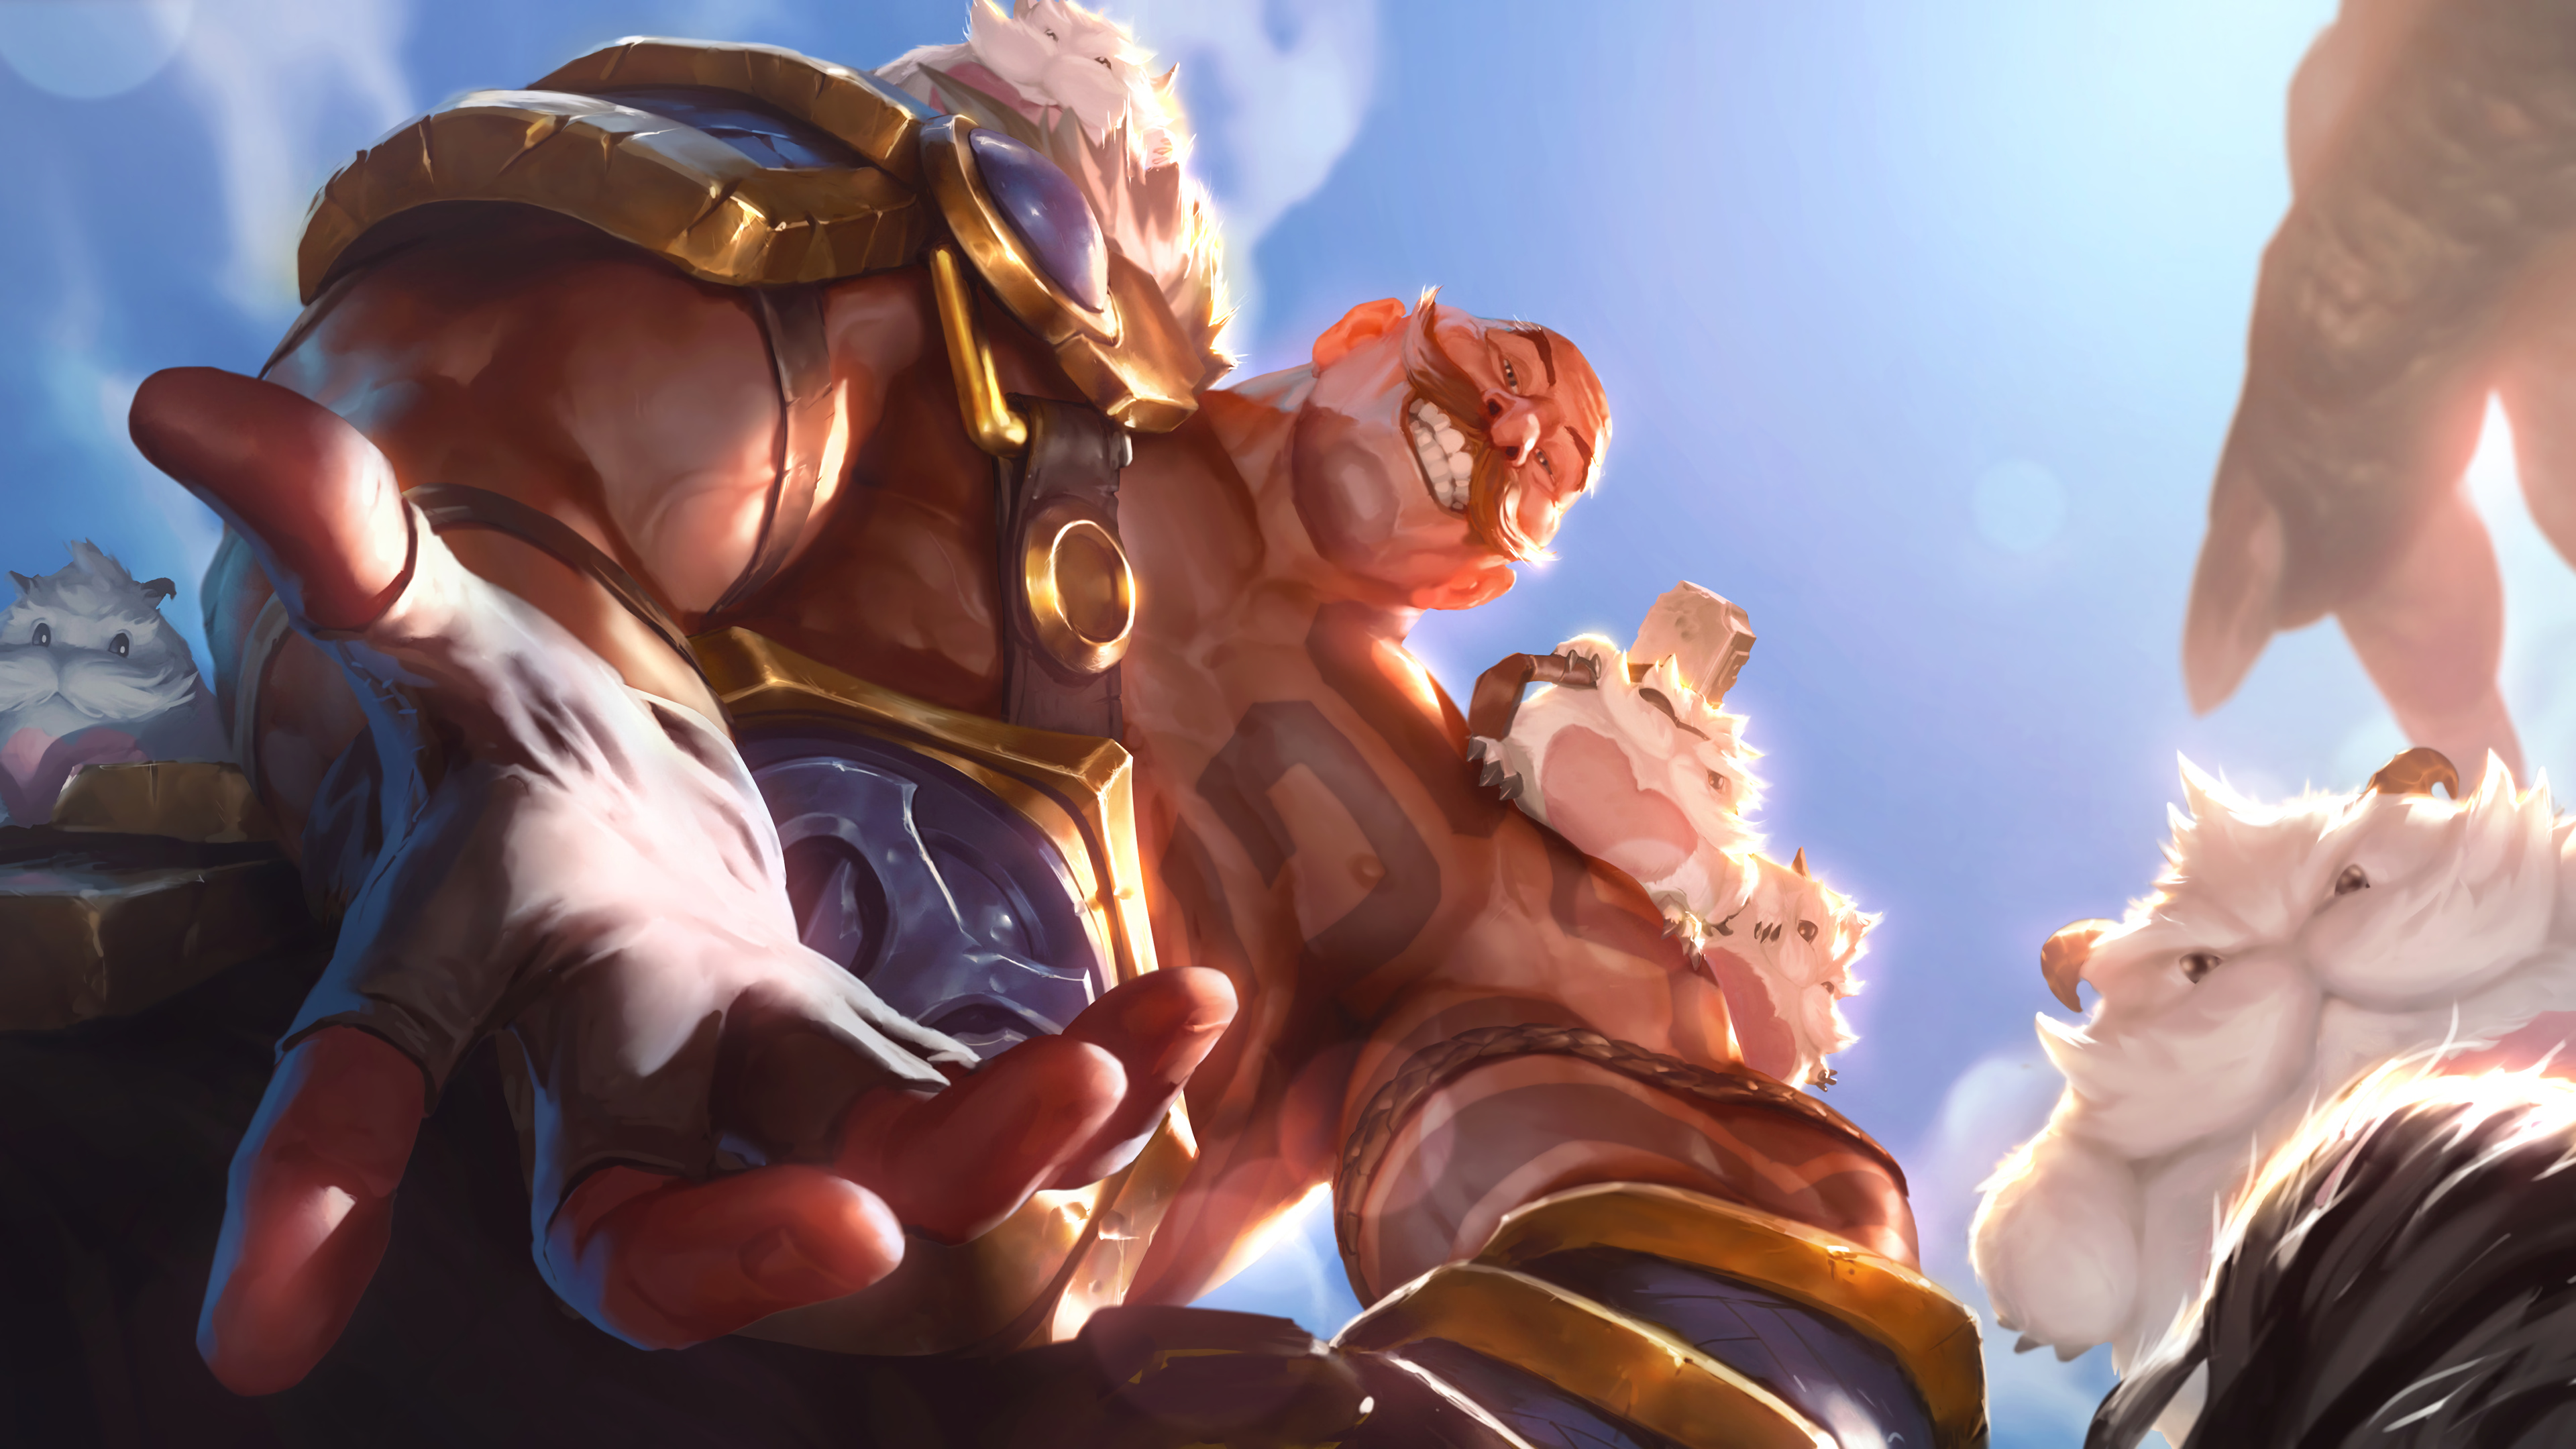 General 3840x2160 Legends of Runeterra League of Legends braum Poro Riot Games video games video game characters